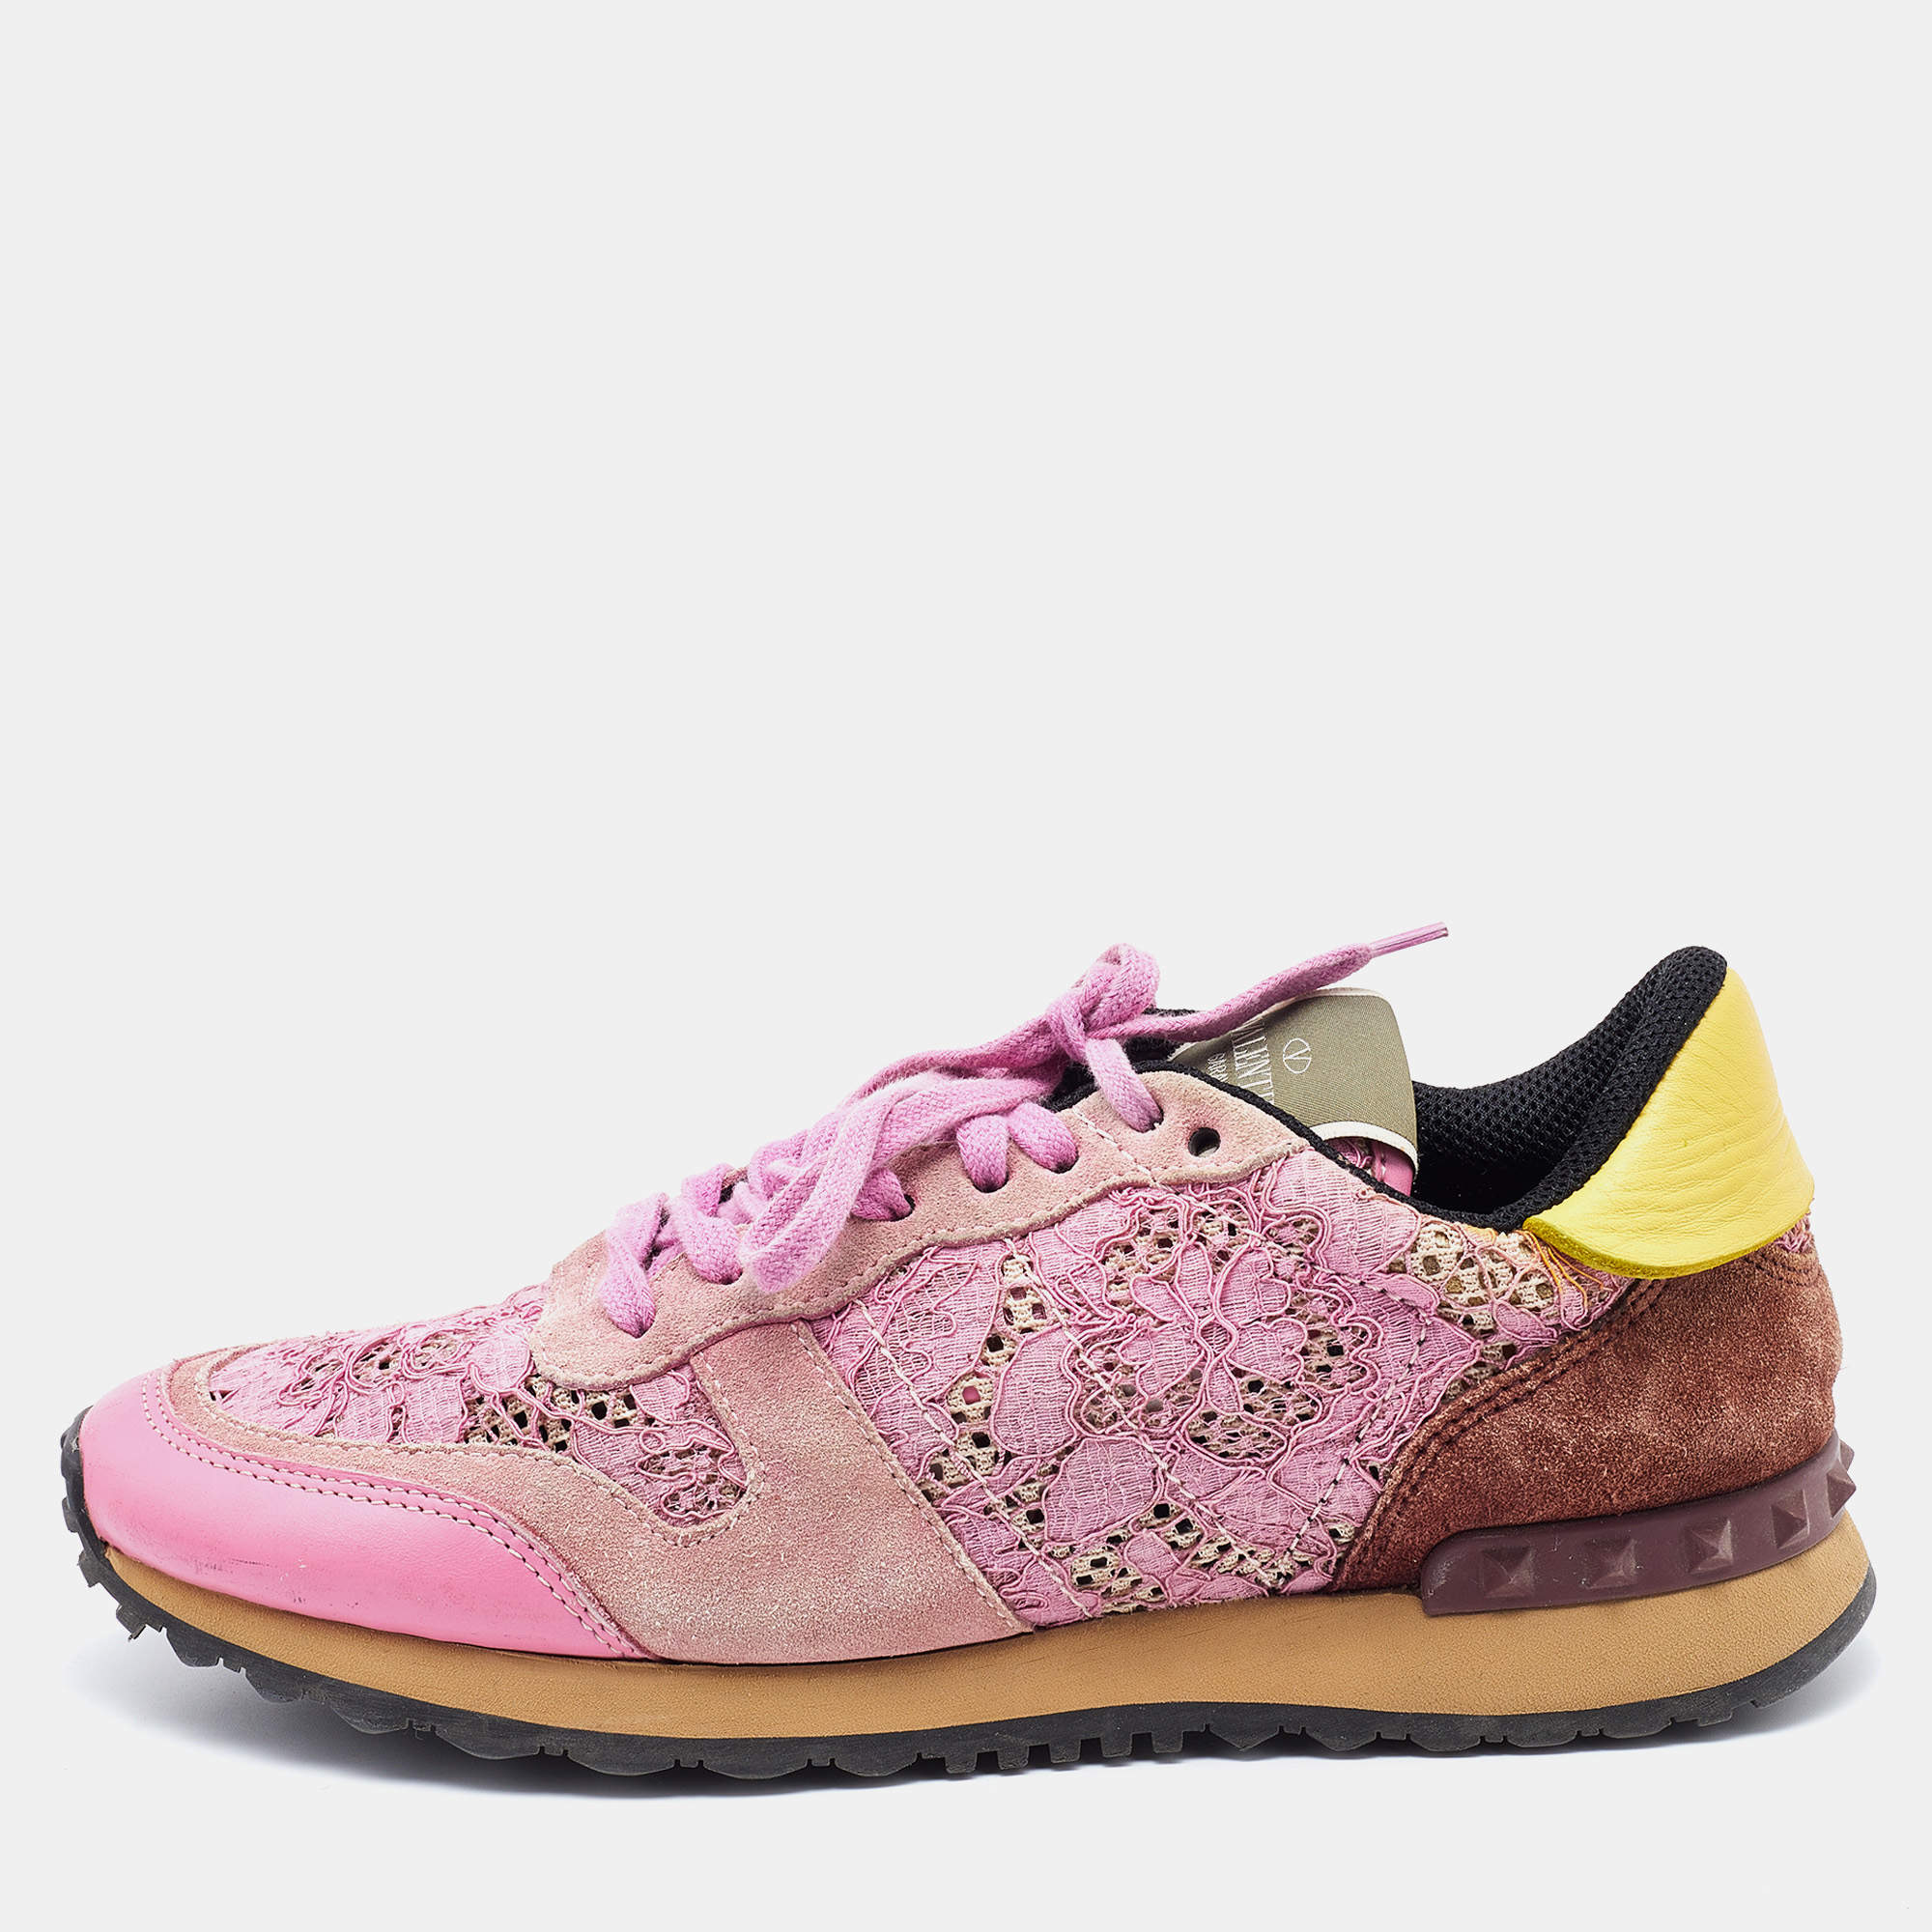 Valentino Multicolor Leather, Suede and Lace Rockrunner Low Top Sneakers Size 39